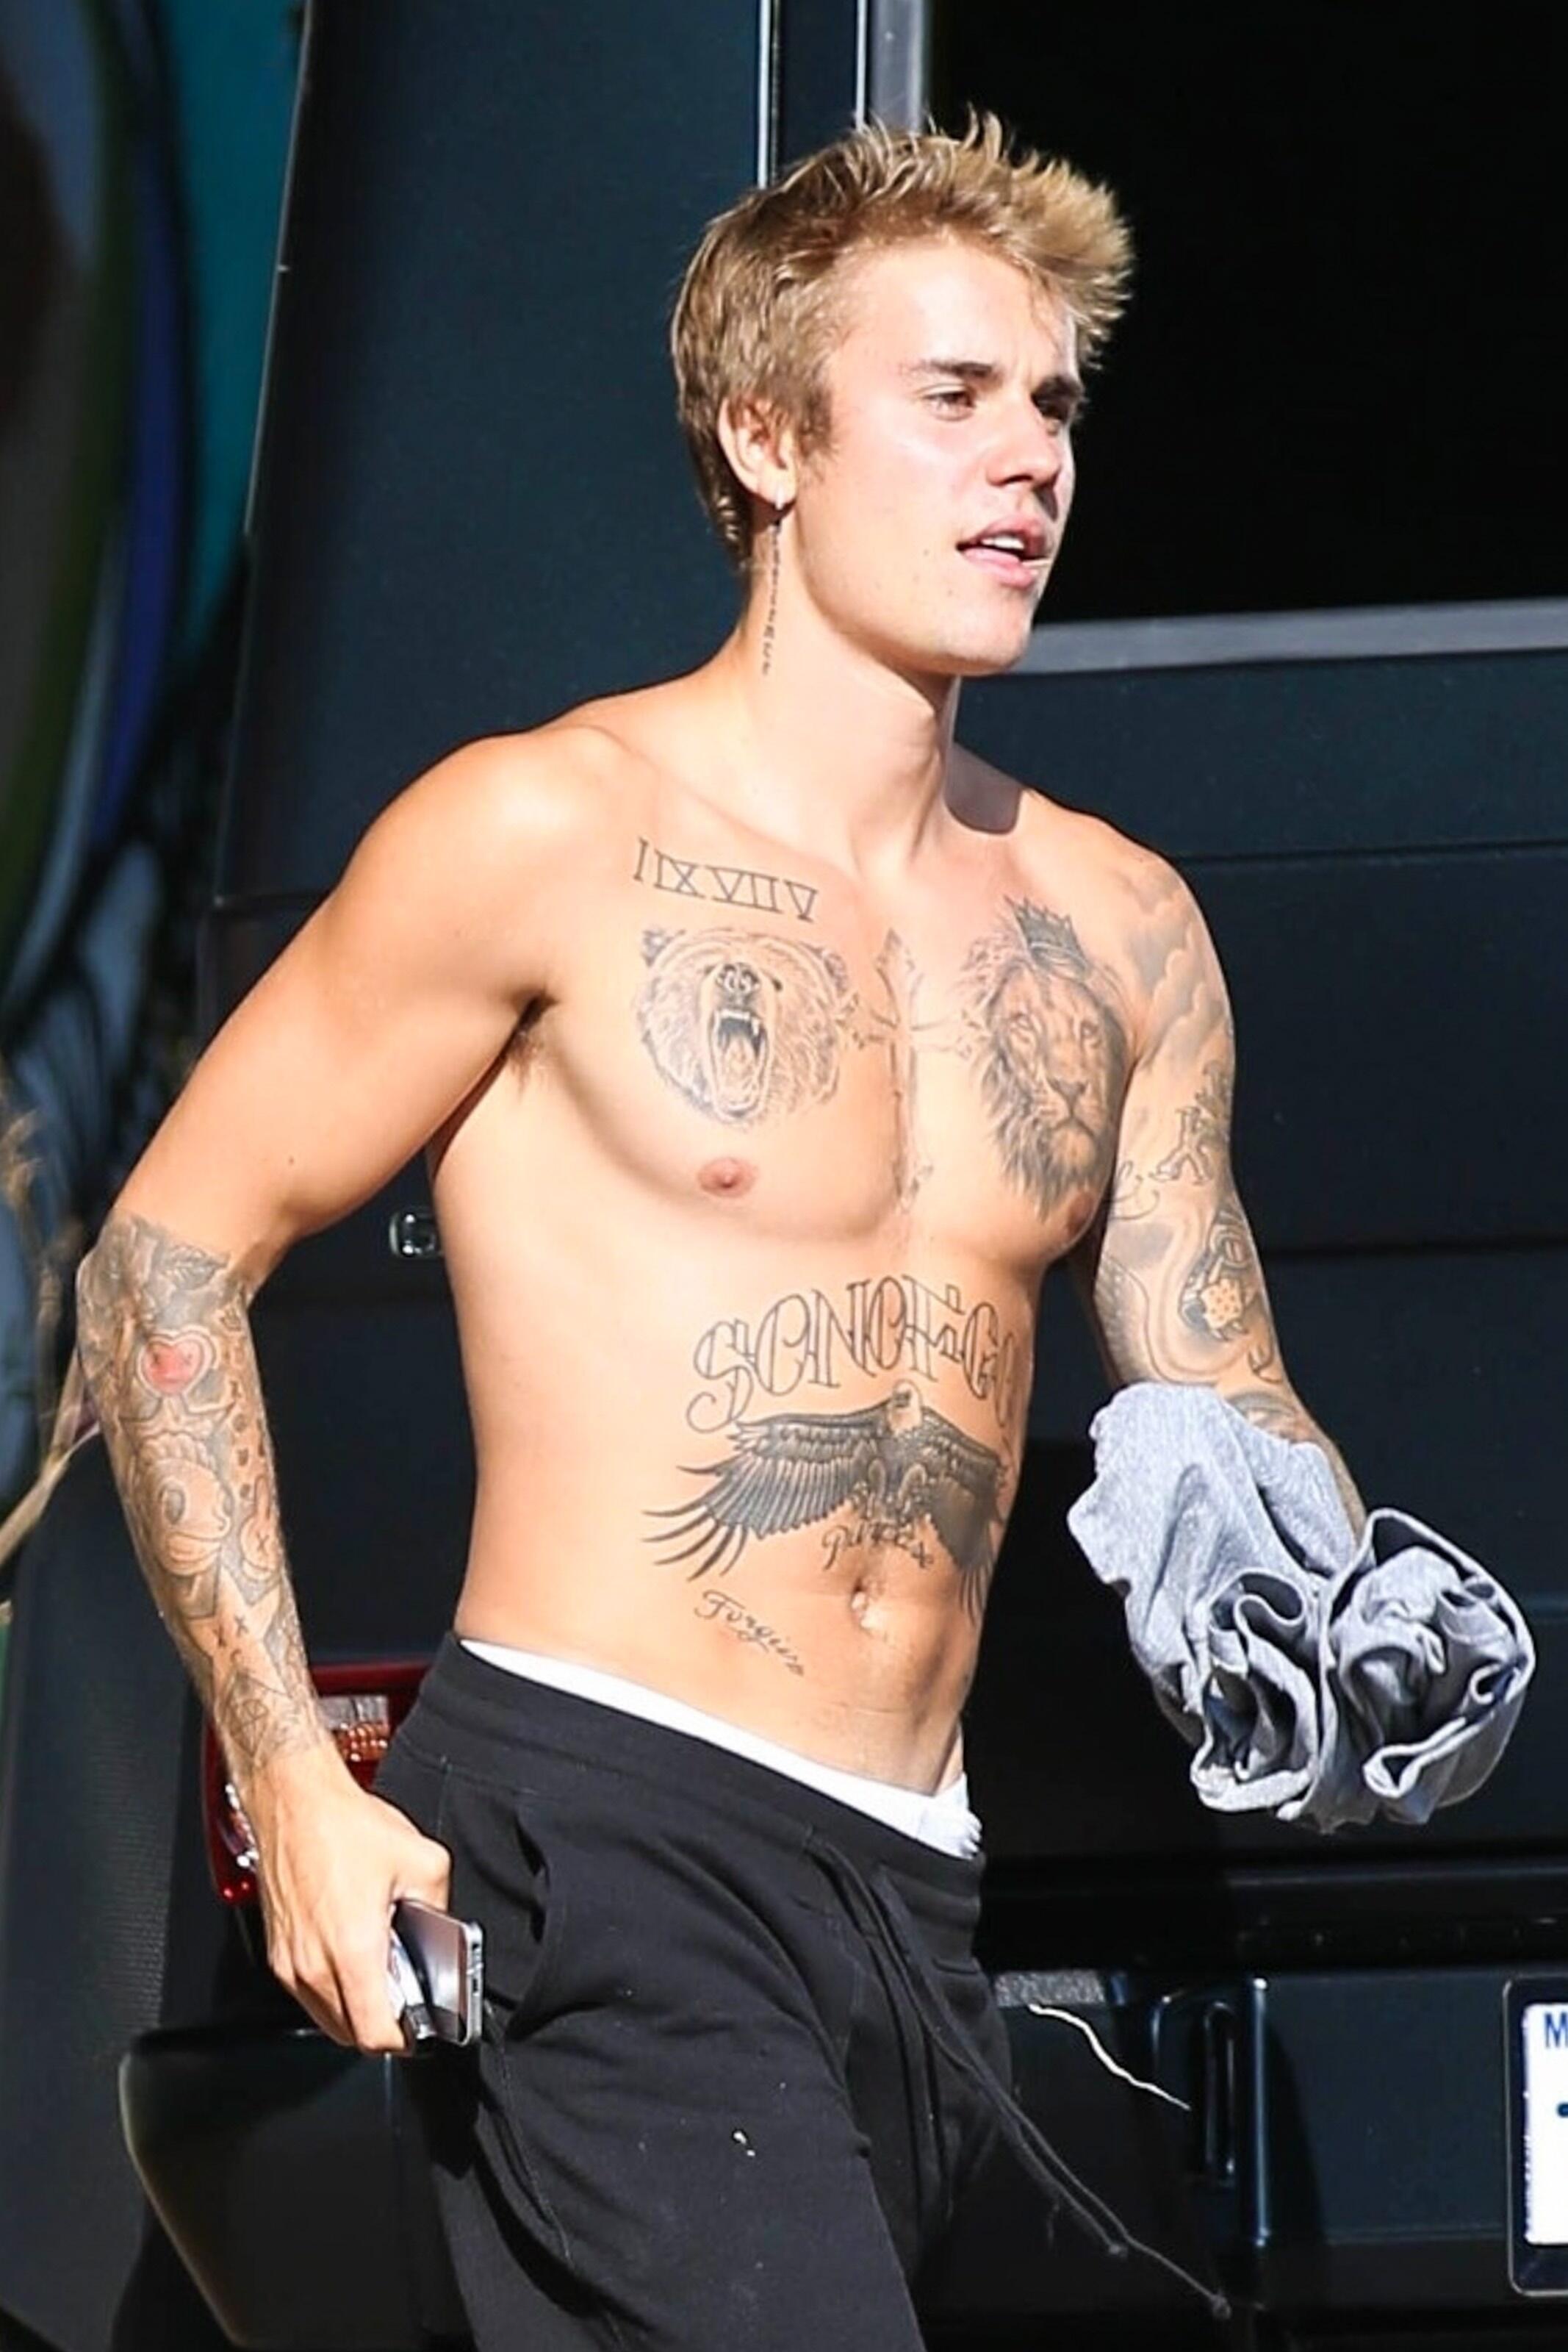 11 Shirtless Photos Of Justin Bieber To Quench Your Thirst Iheartradio